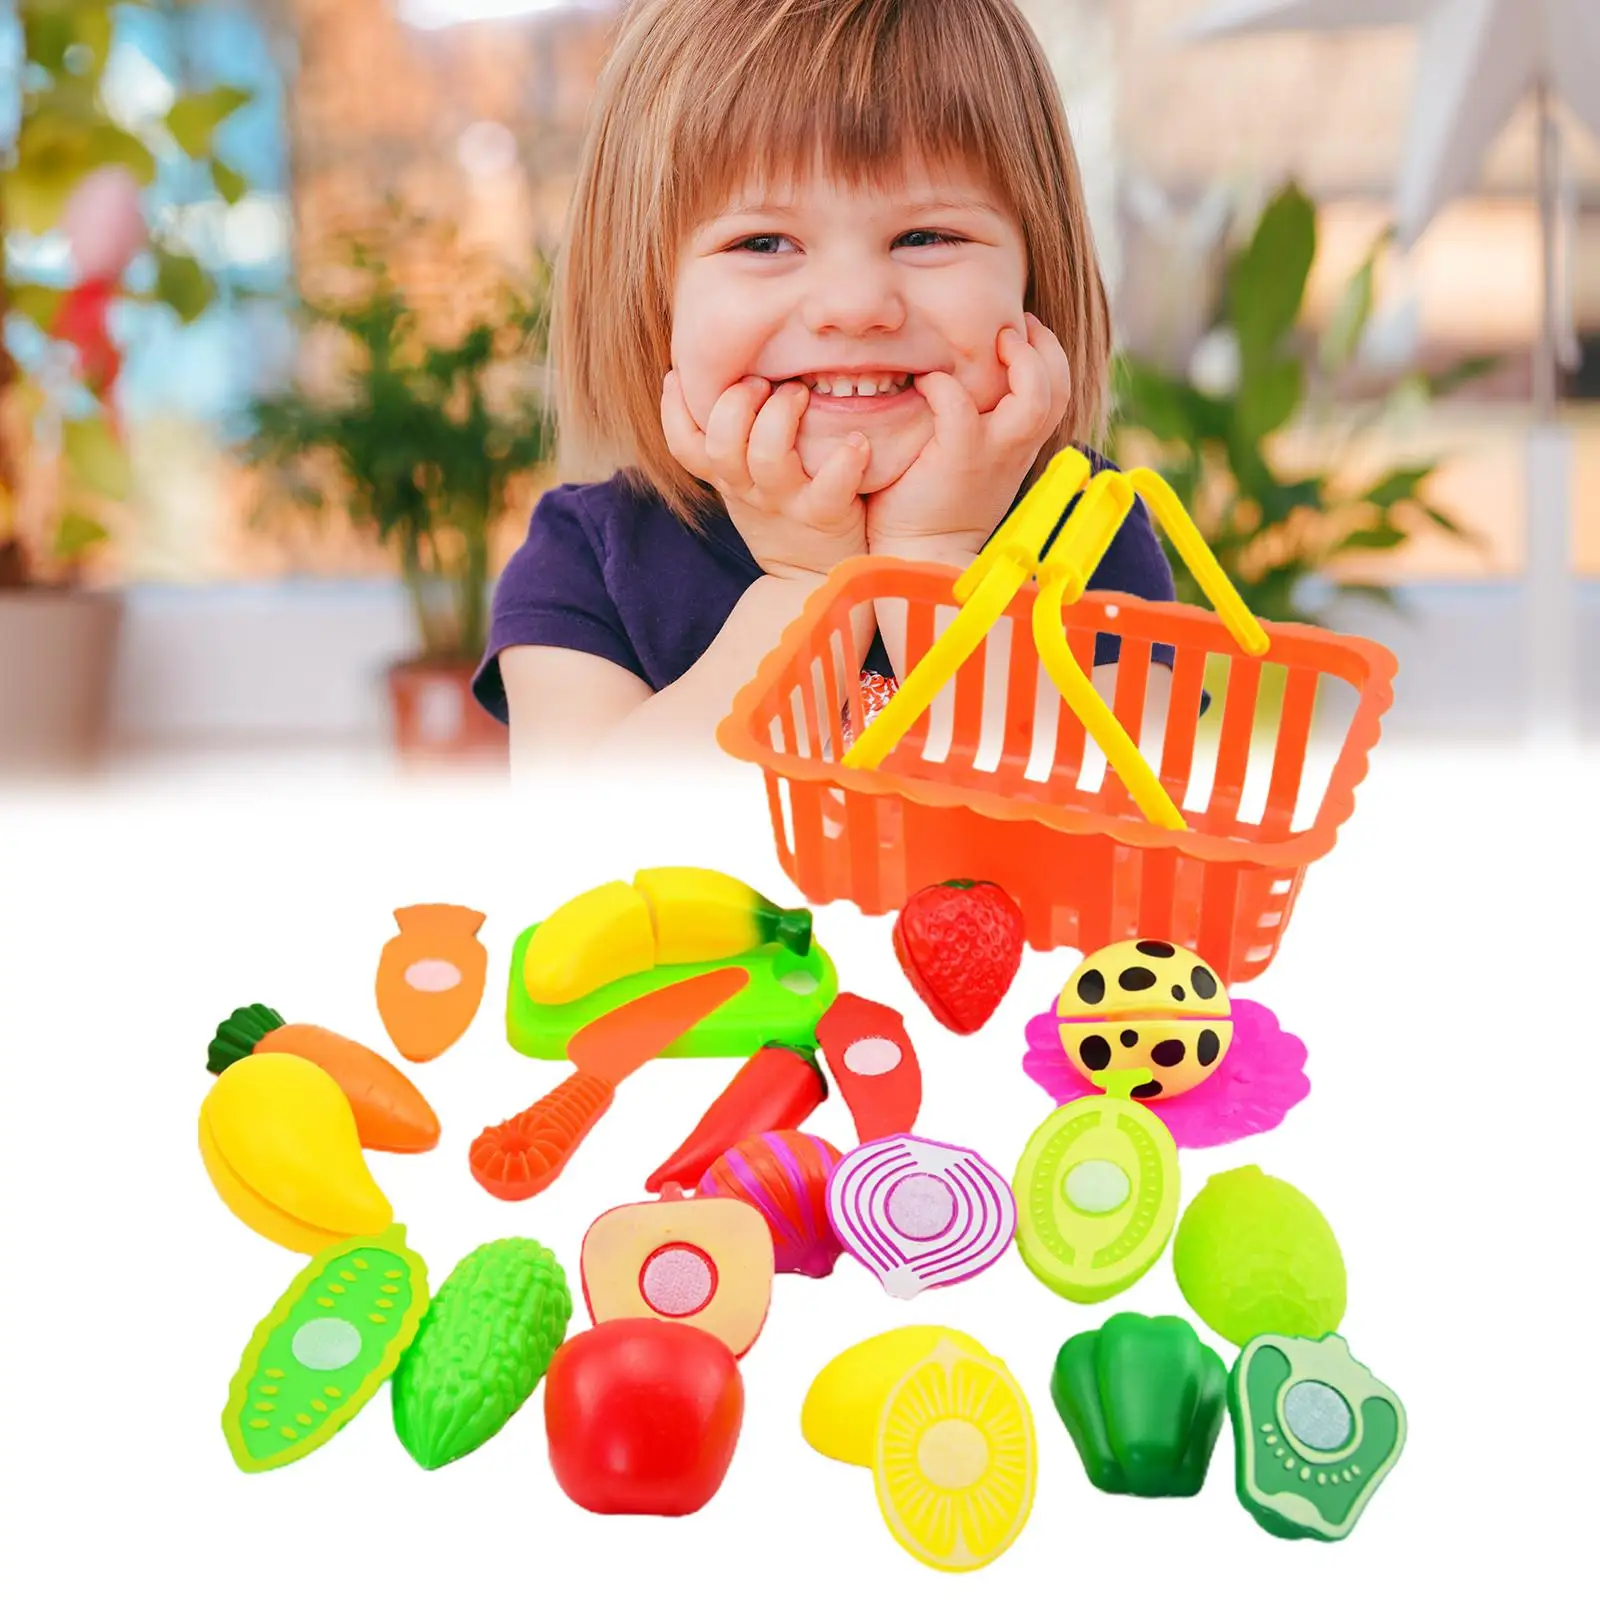 Pretend  Set Vegetables and Fruits Role  Simulation Cutting  Food for Over 3 Years Old Toddlers with Storage Basket